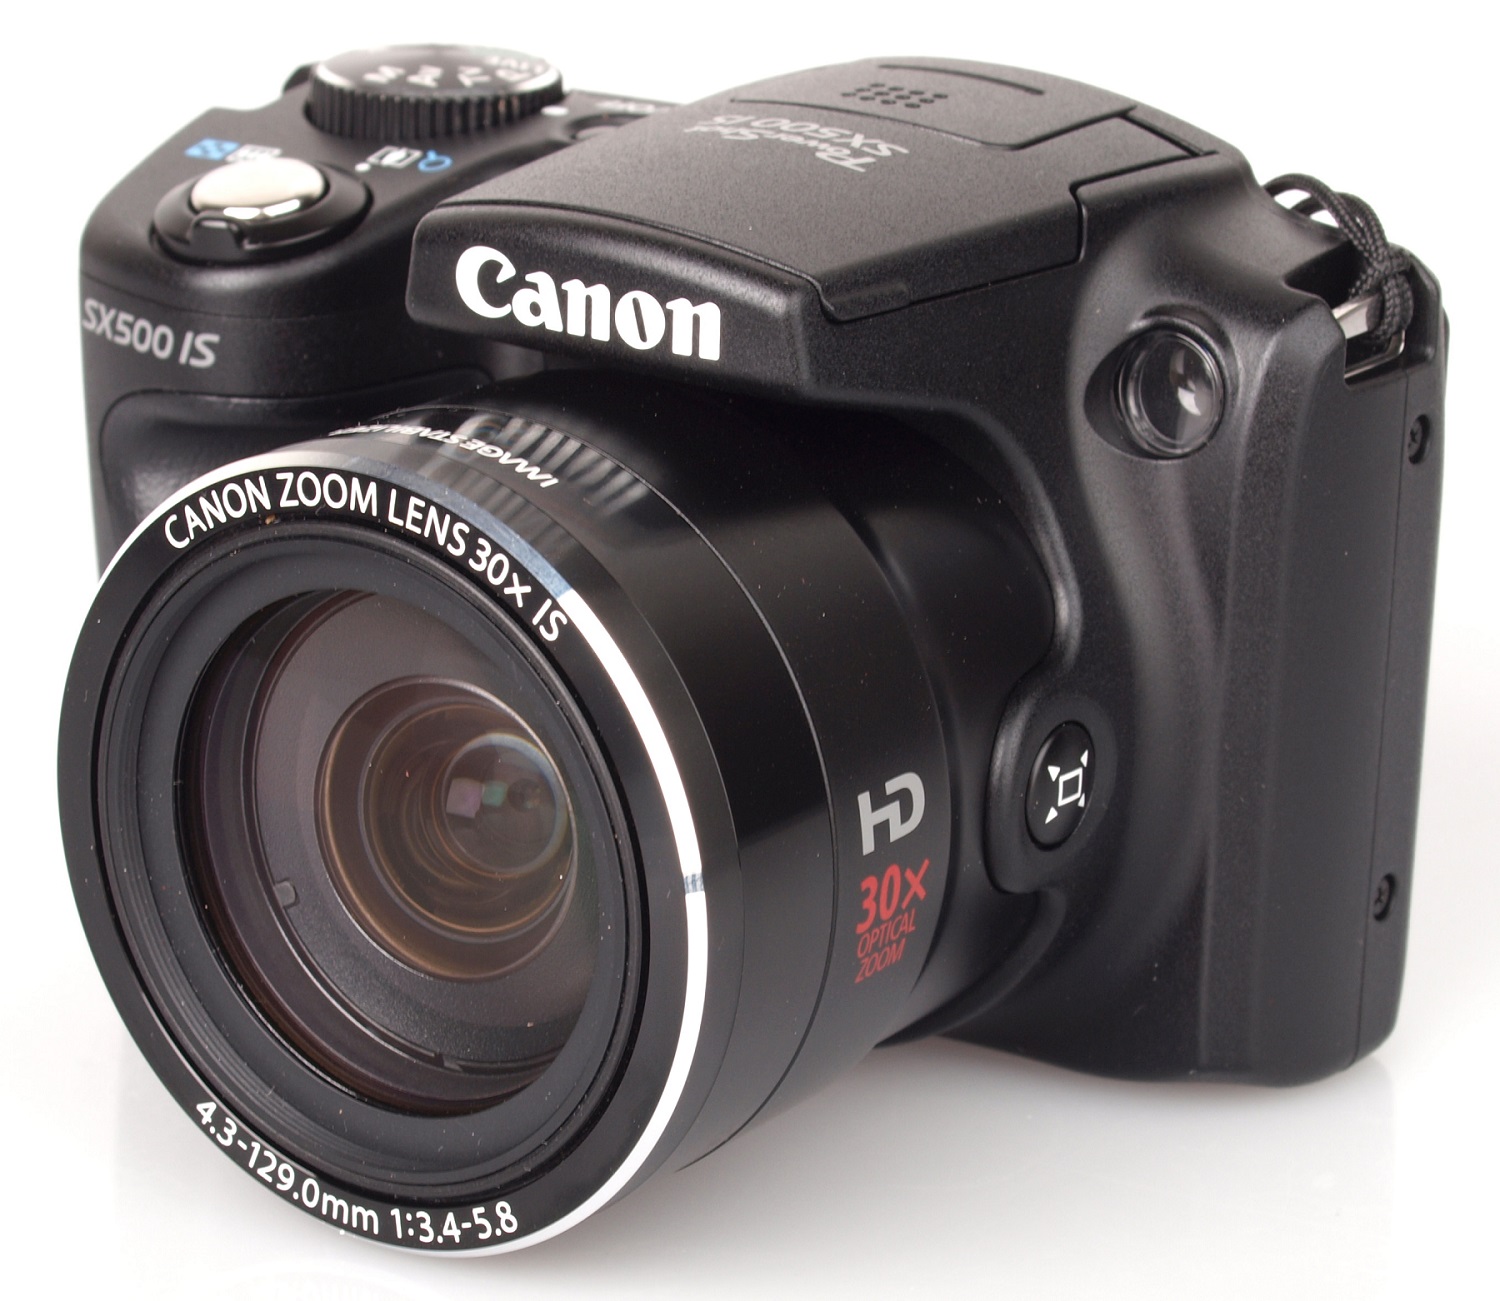 Canon Powershot SX500 IS Ultra Zoom Review